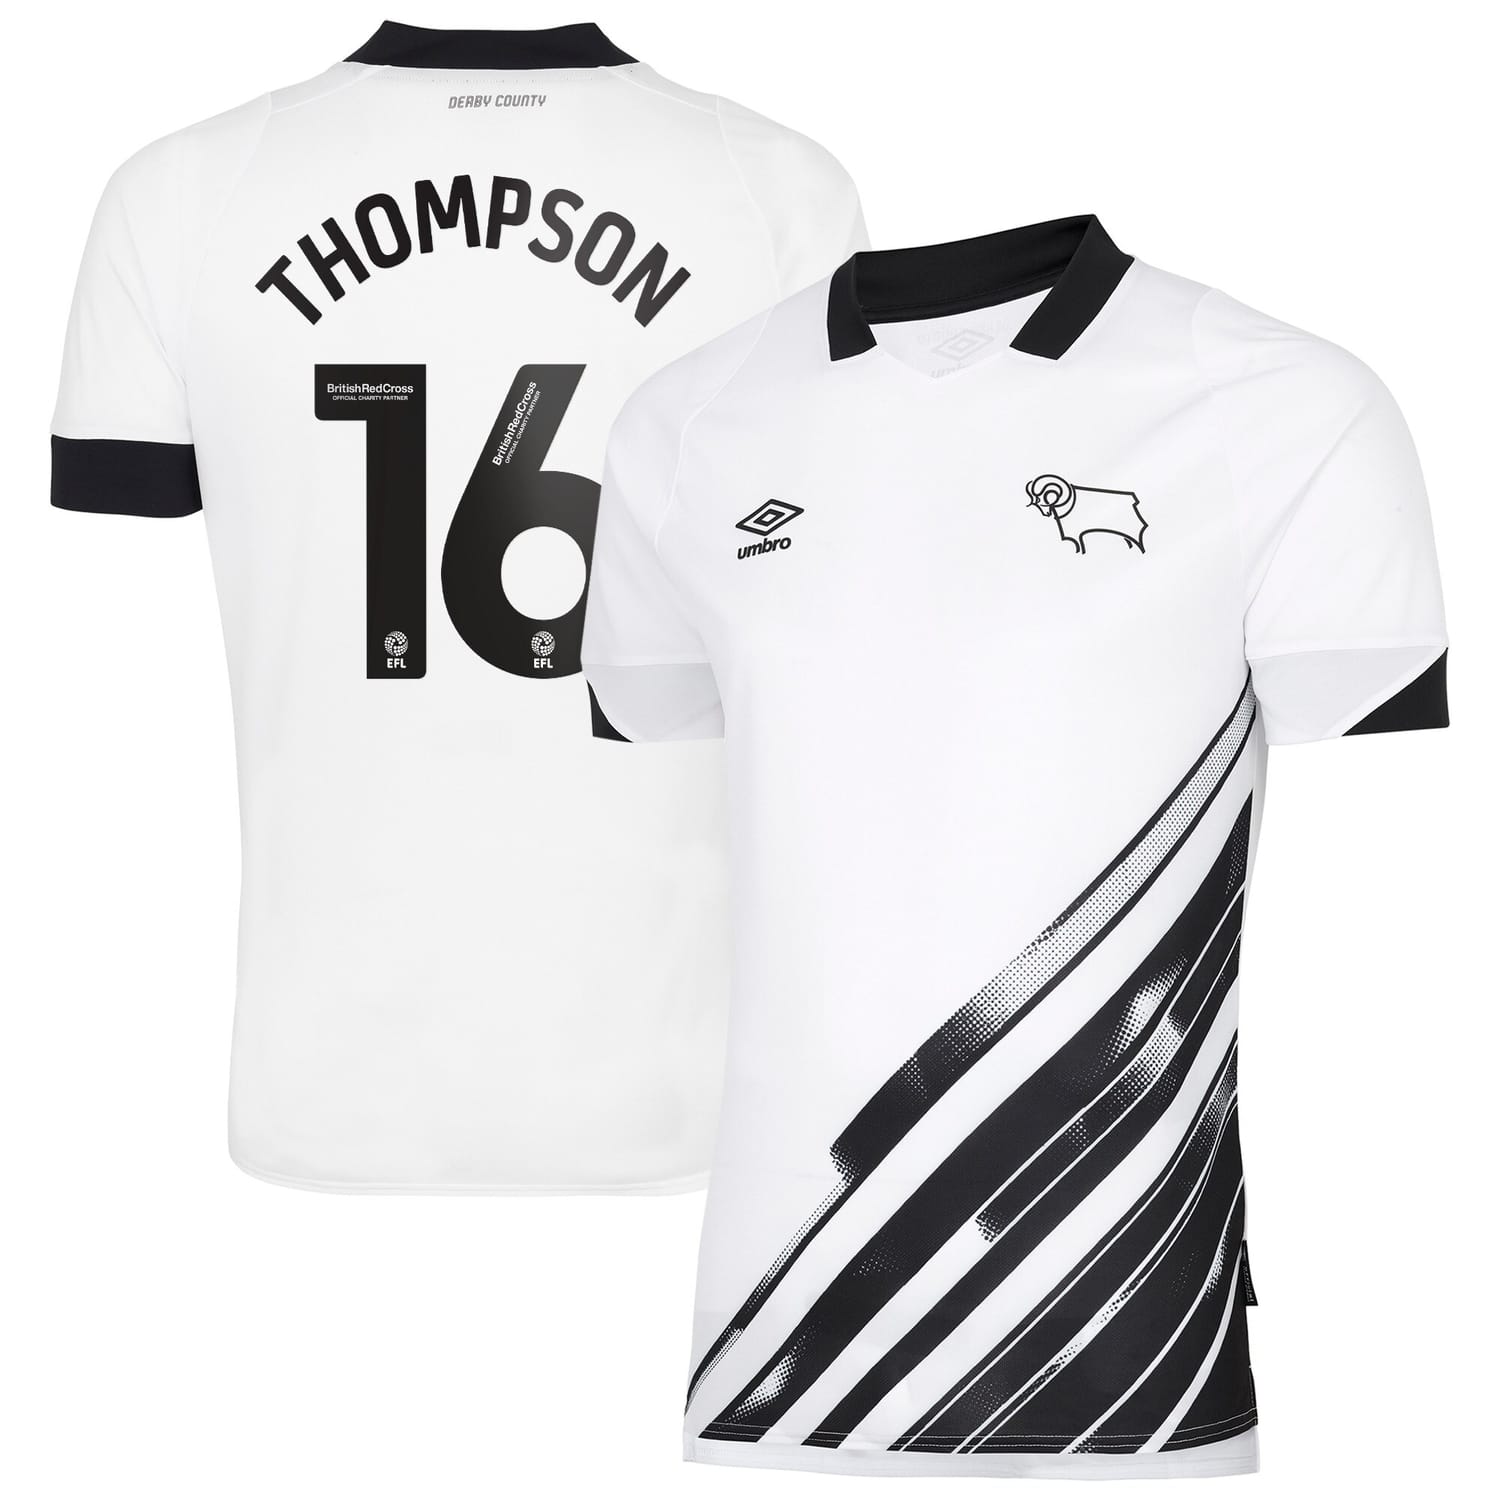 EFL League One Derby County Home Jersey Shirt 2022-23 player Thompson 16 printing for Men